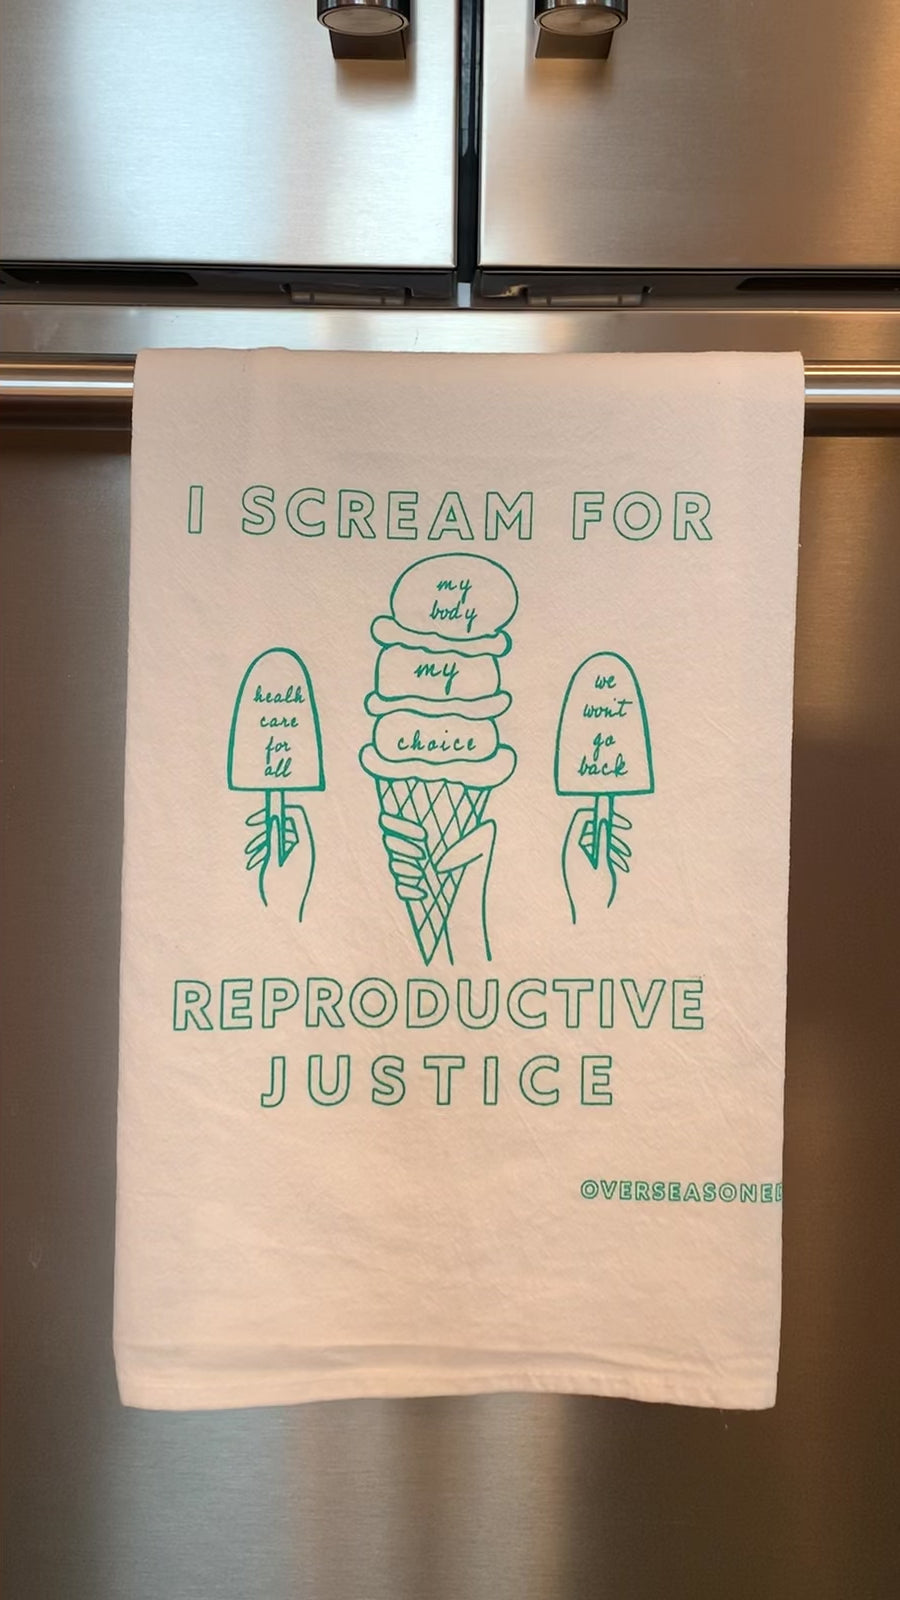 A white tea towel with mint green block letters that reads "I scream for reproductive justice" hangs in a kitchen